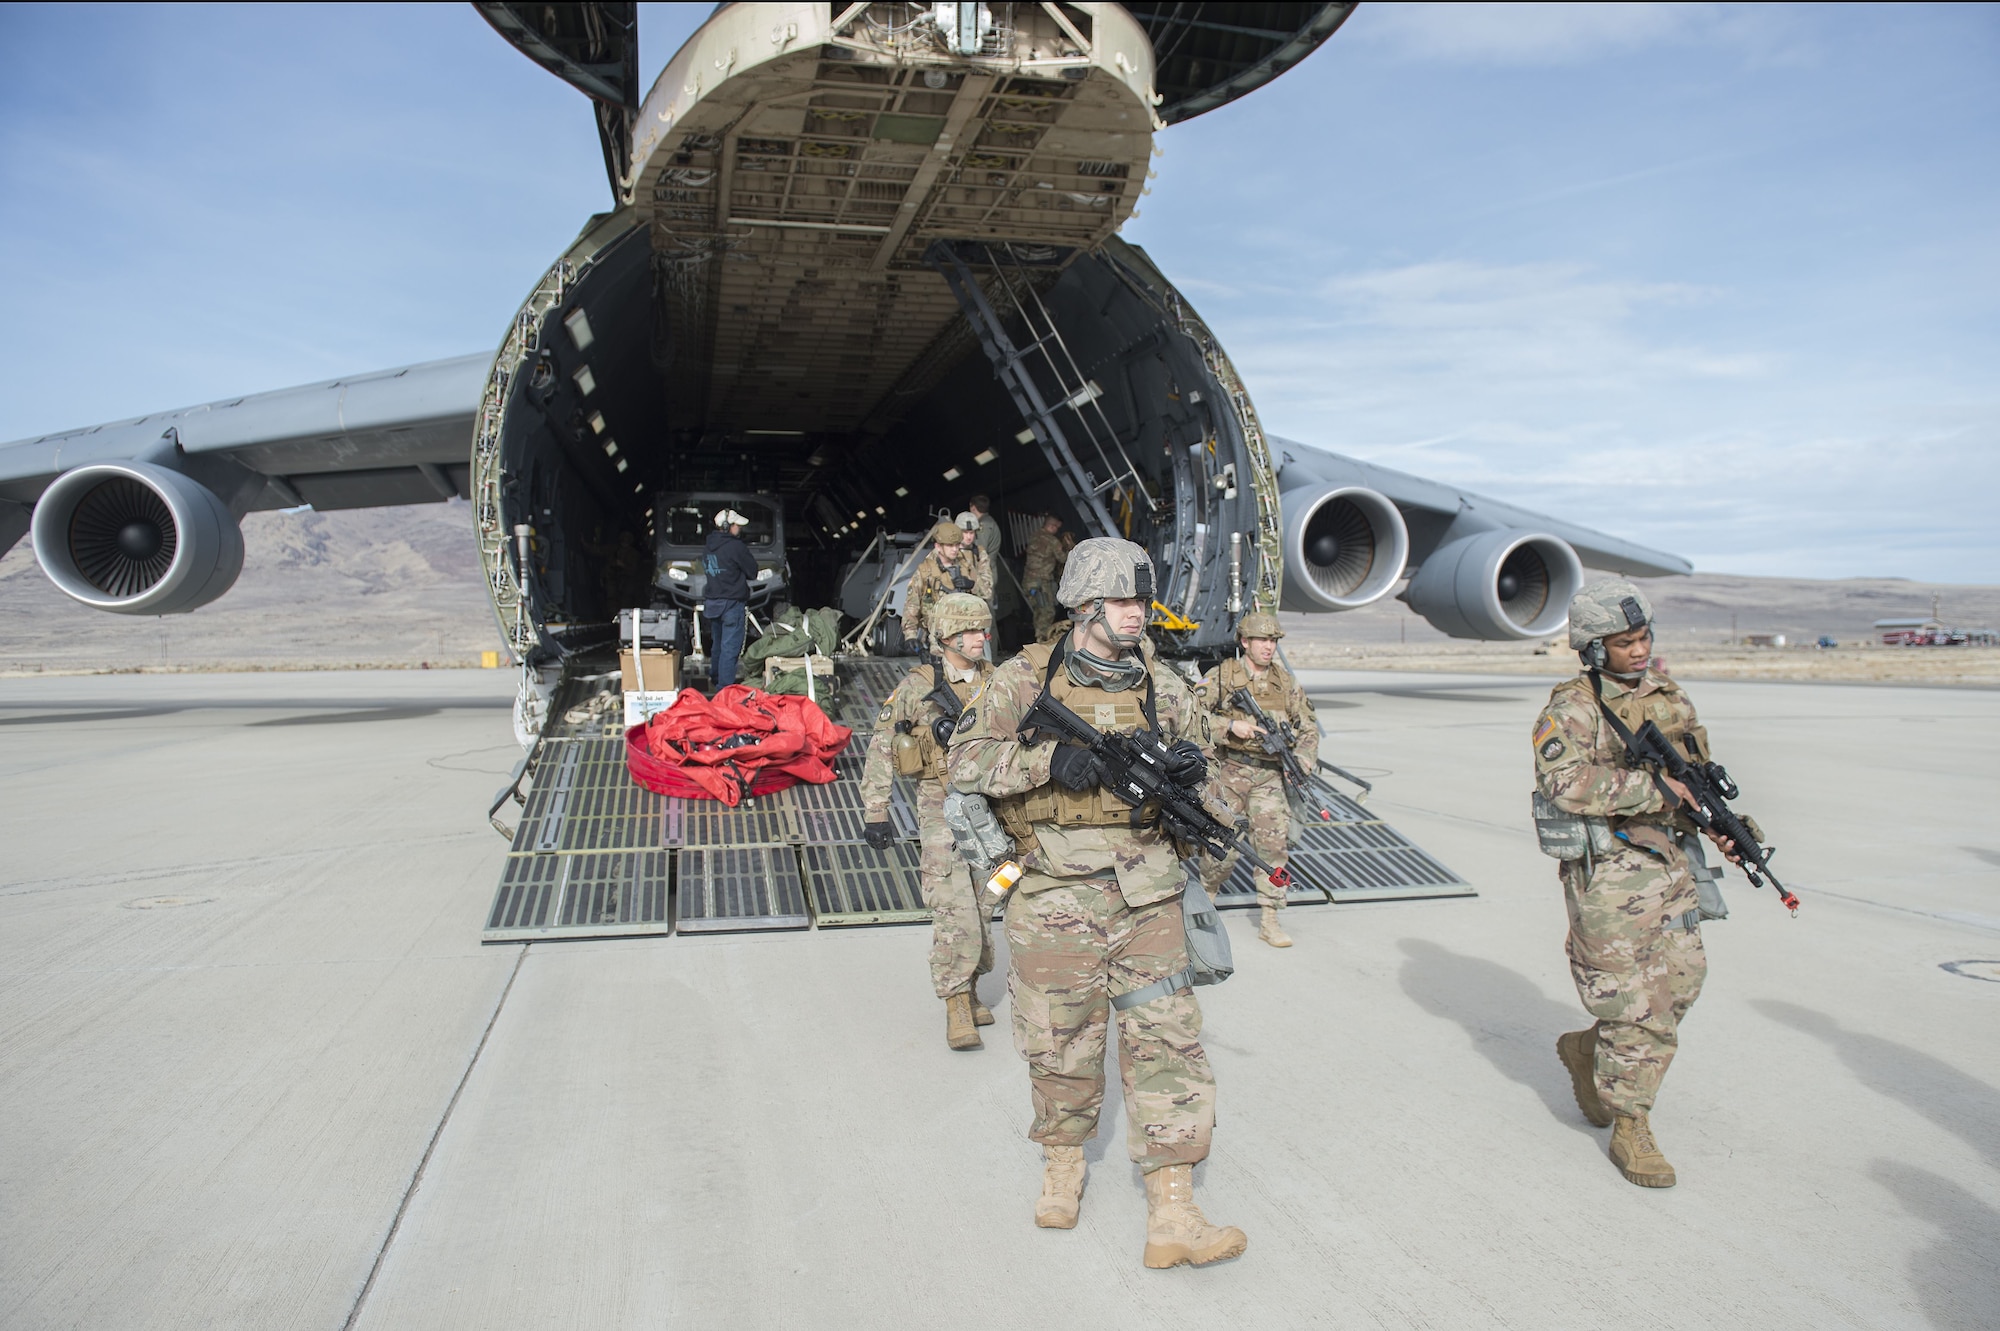 Airmen assigned to the 821st Contingency Response Group deployed to Amedee Army Airfield, Calif., as part of a week-long readiness exercise, Jan. 31, 2018.  The exercise evaluated the Airmen’s readiness and ability to execute and sustain rapid global mobility around the world. (U.S. Air Force photo by Tech. Sgt. Liliana Moreno/Released)